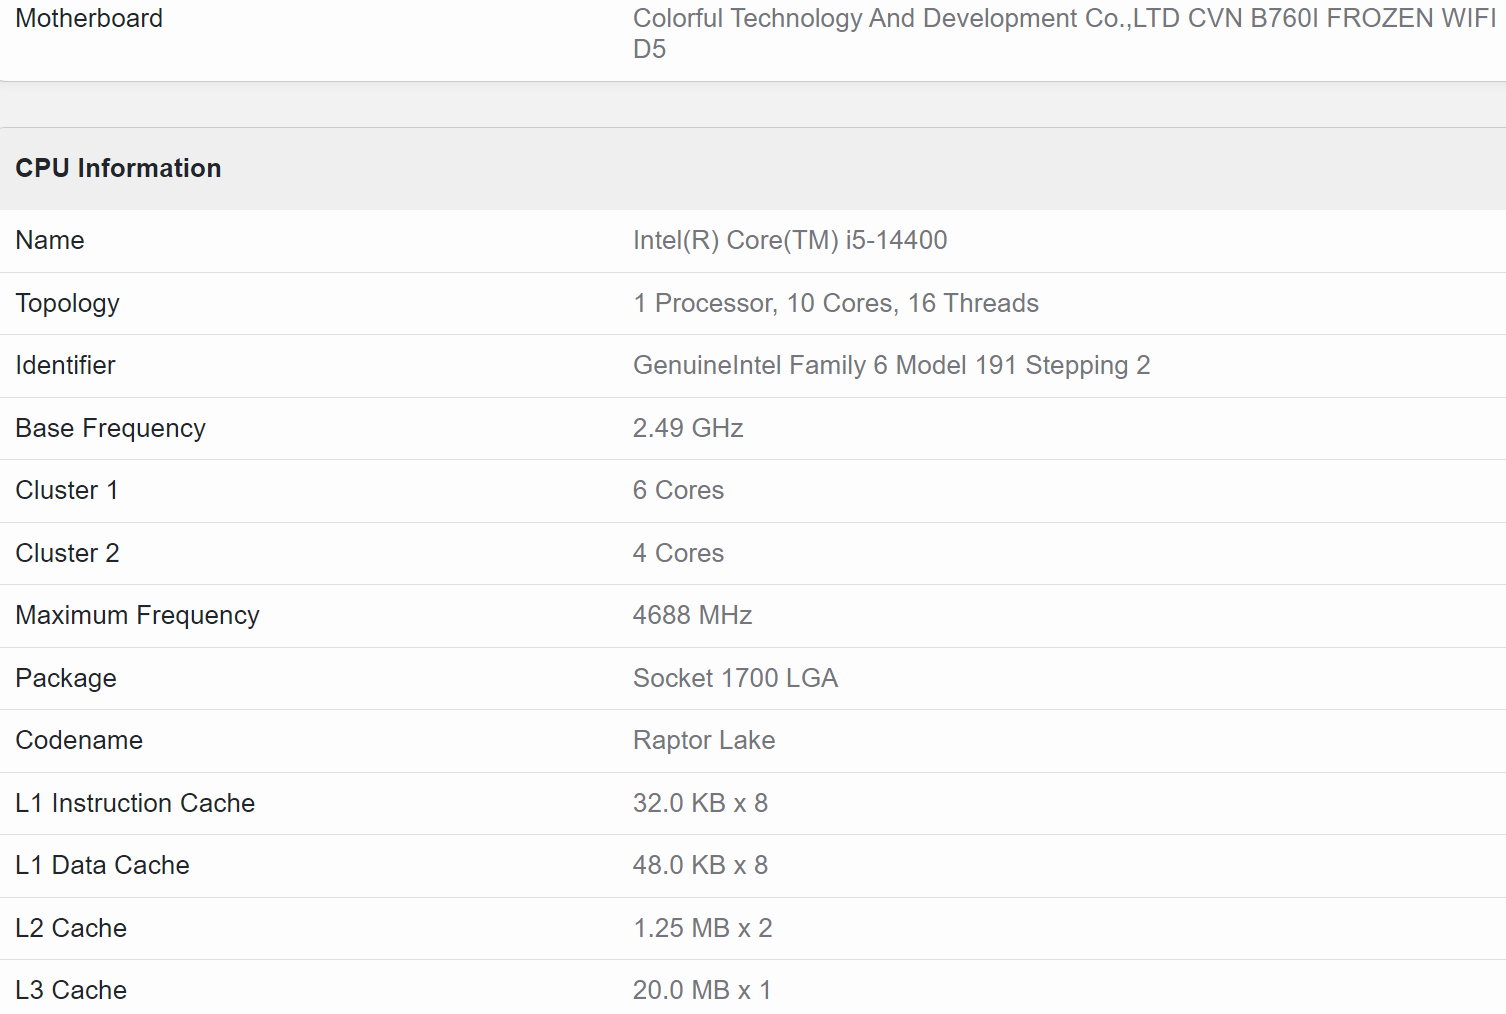 Intel Core i5-14600KF shows up on Geekbench with decent